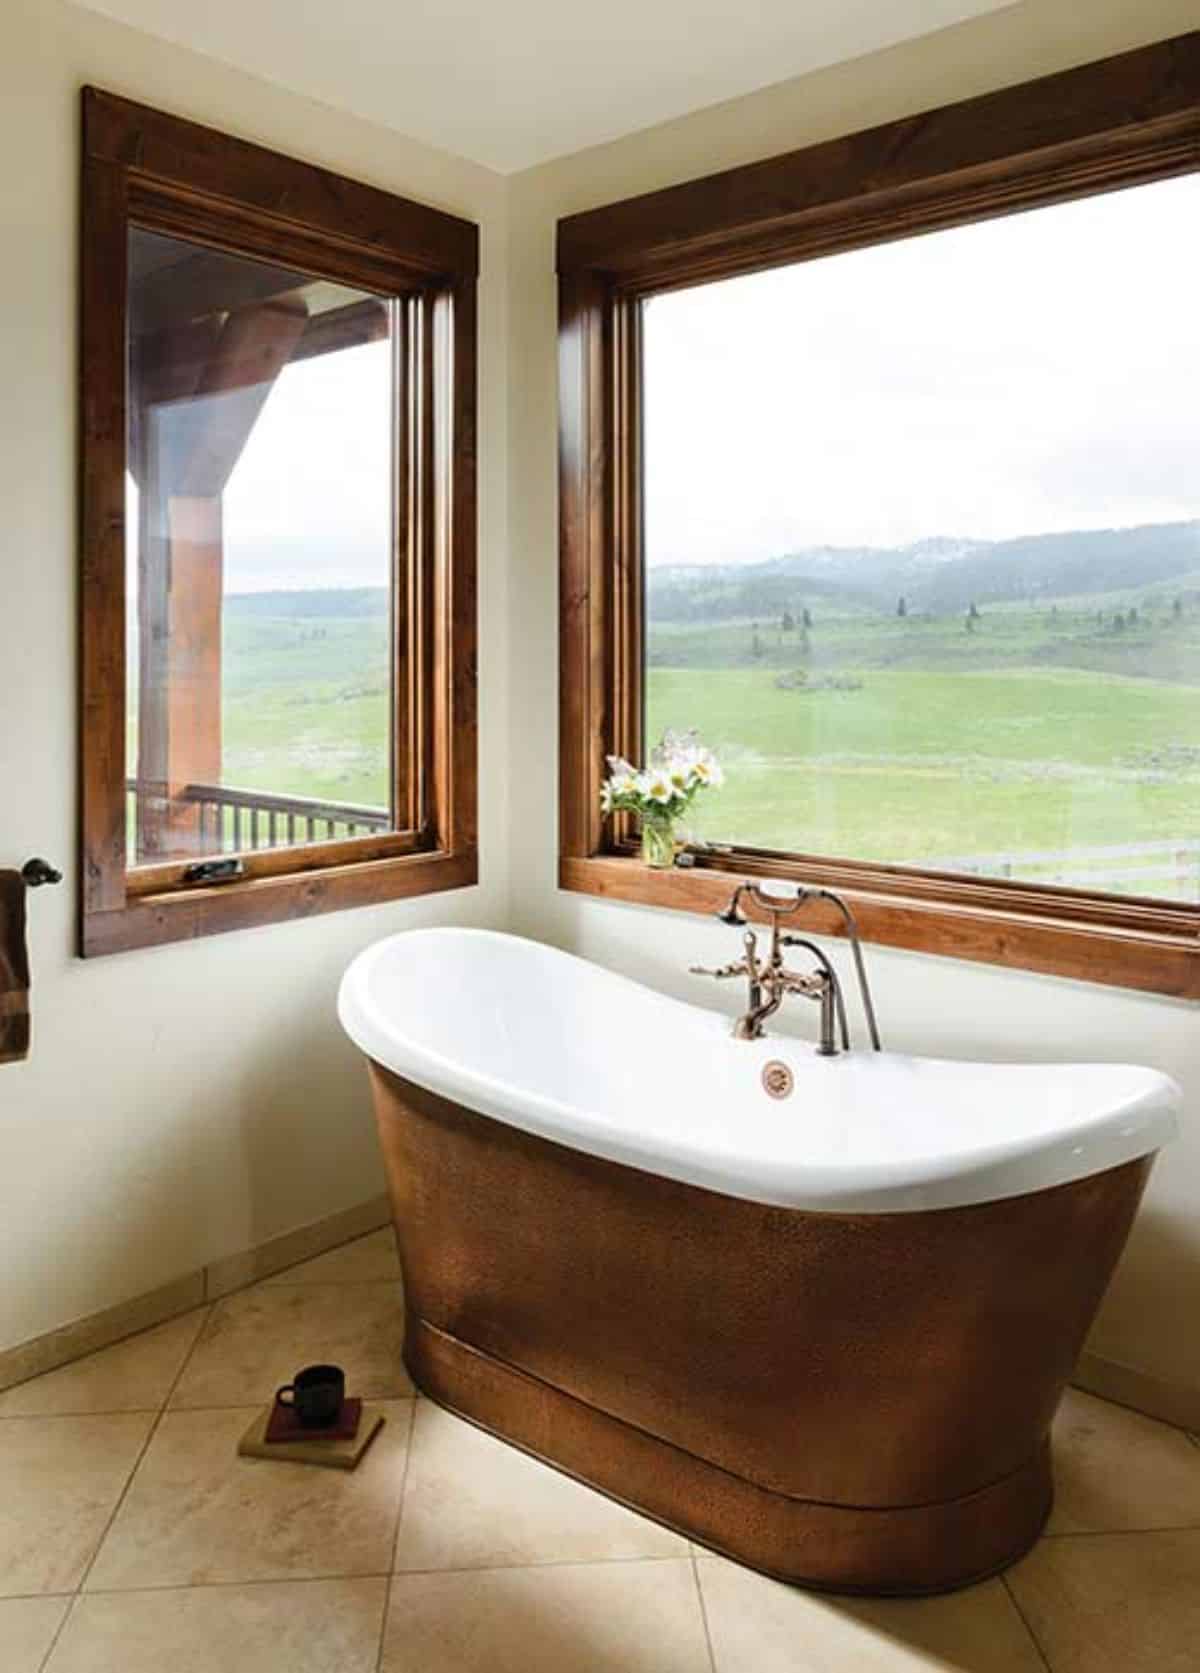 copper base on white soaking bathtub under picture window in bathroom with white walls